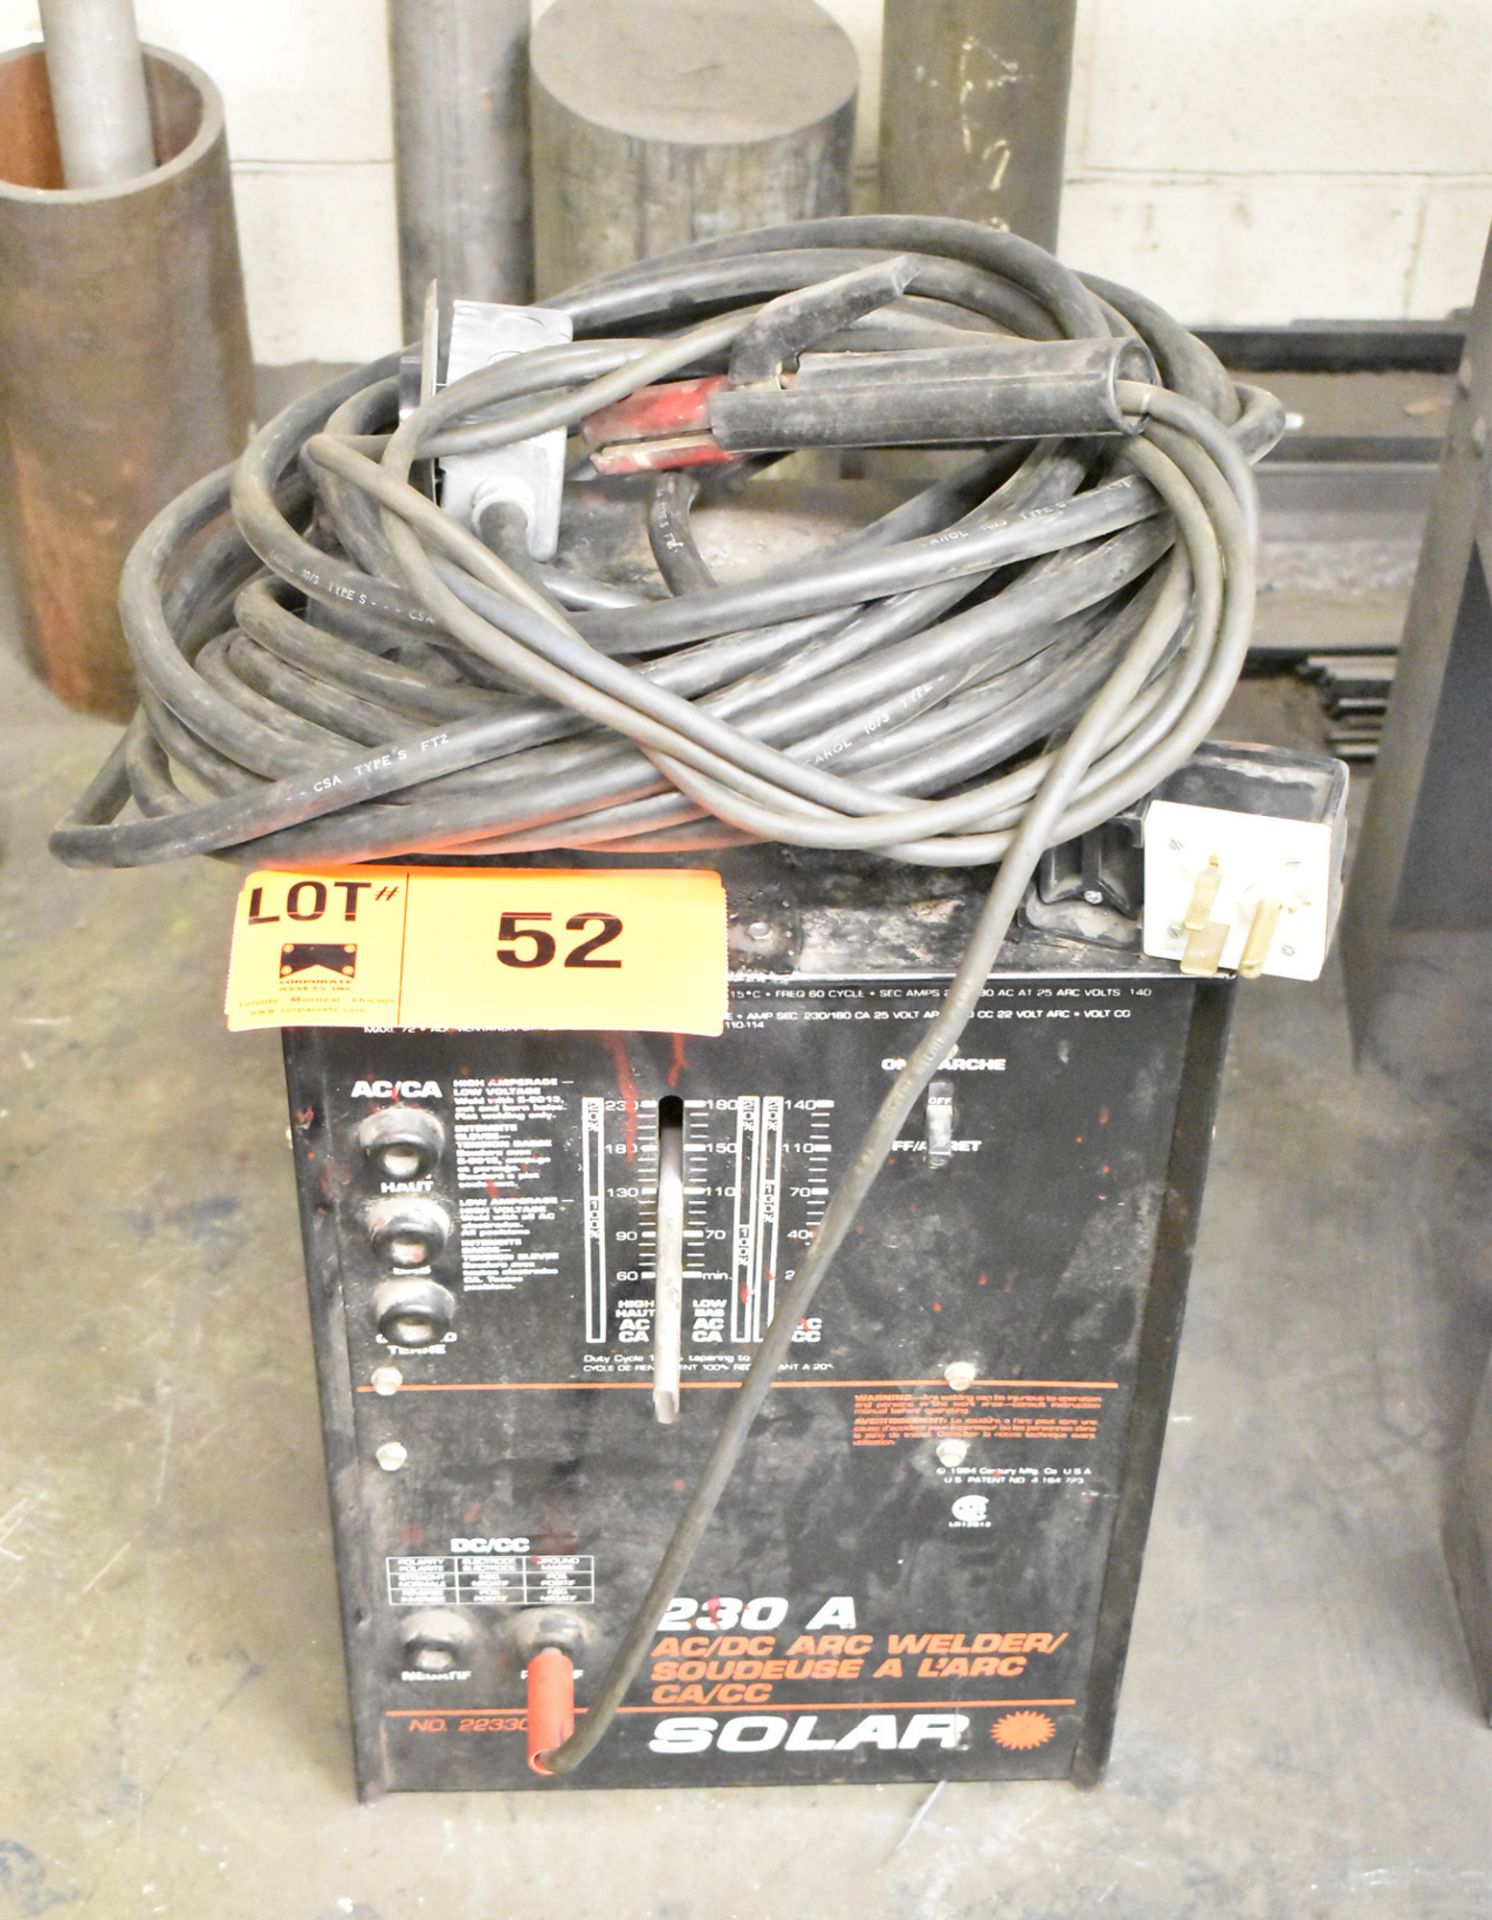 SOLAR 230A ARC WELDER WITH CABLES AND GUN, S/N N/A